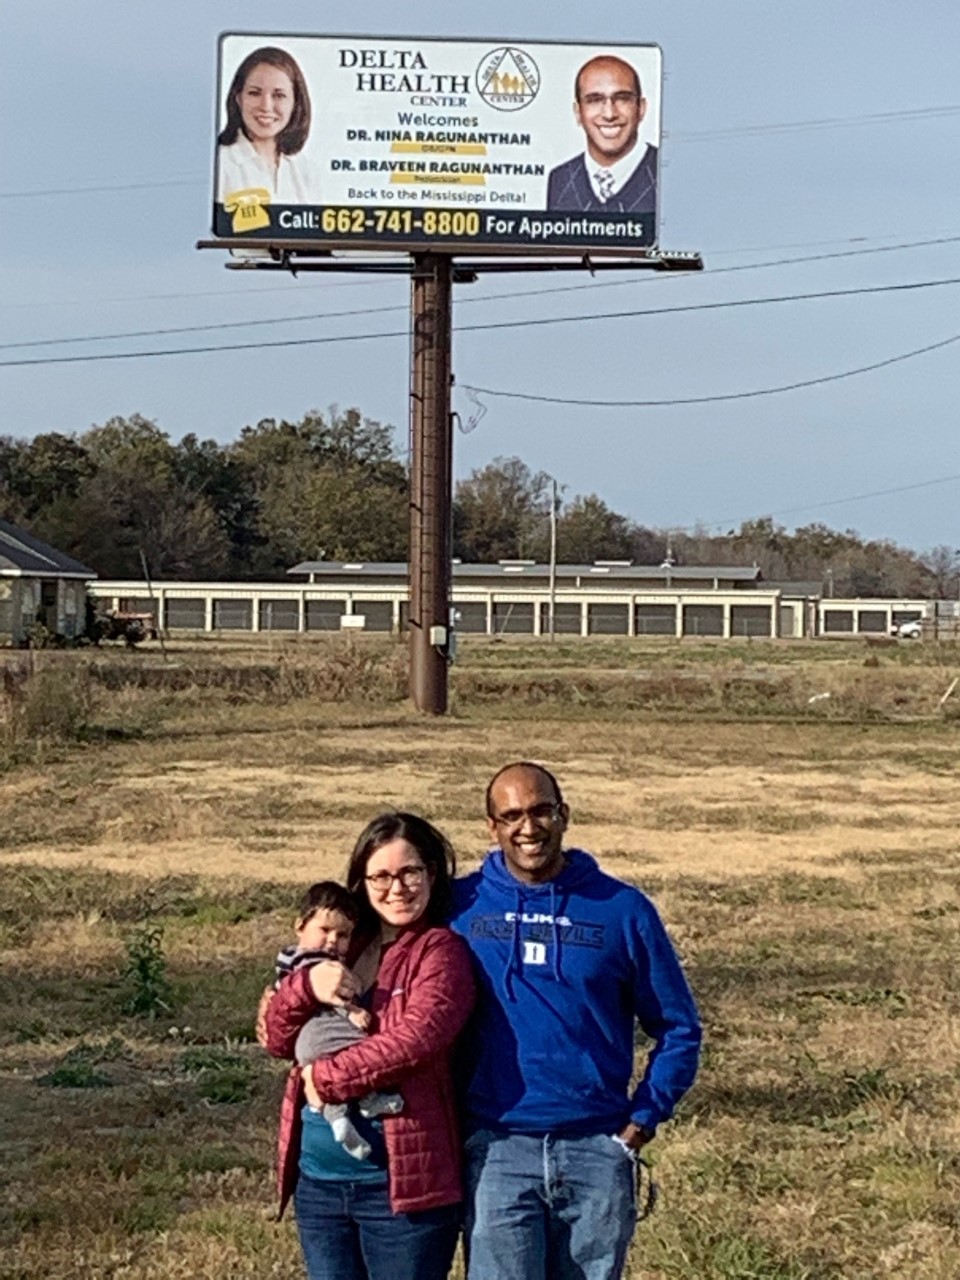 M17 Braveen Ragunanthan stands with his wife and baby in front of a billboard promoting their arrival in rural Mississippi